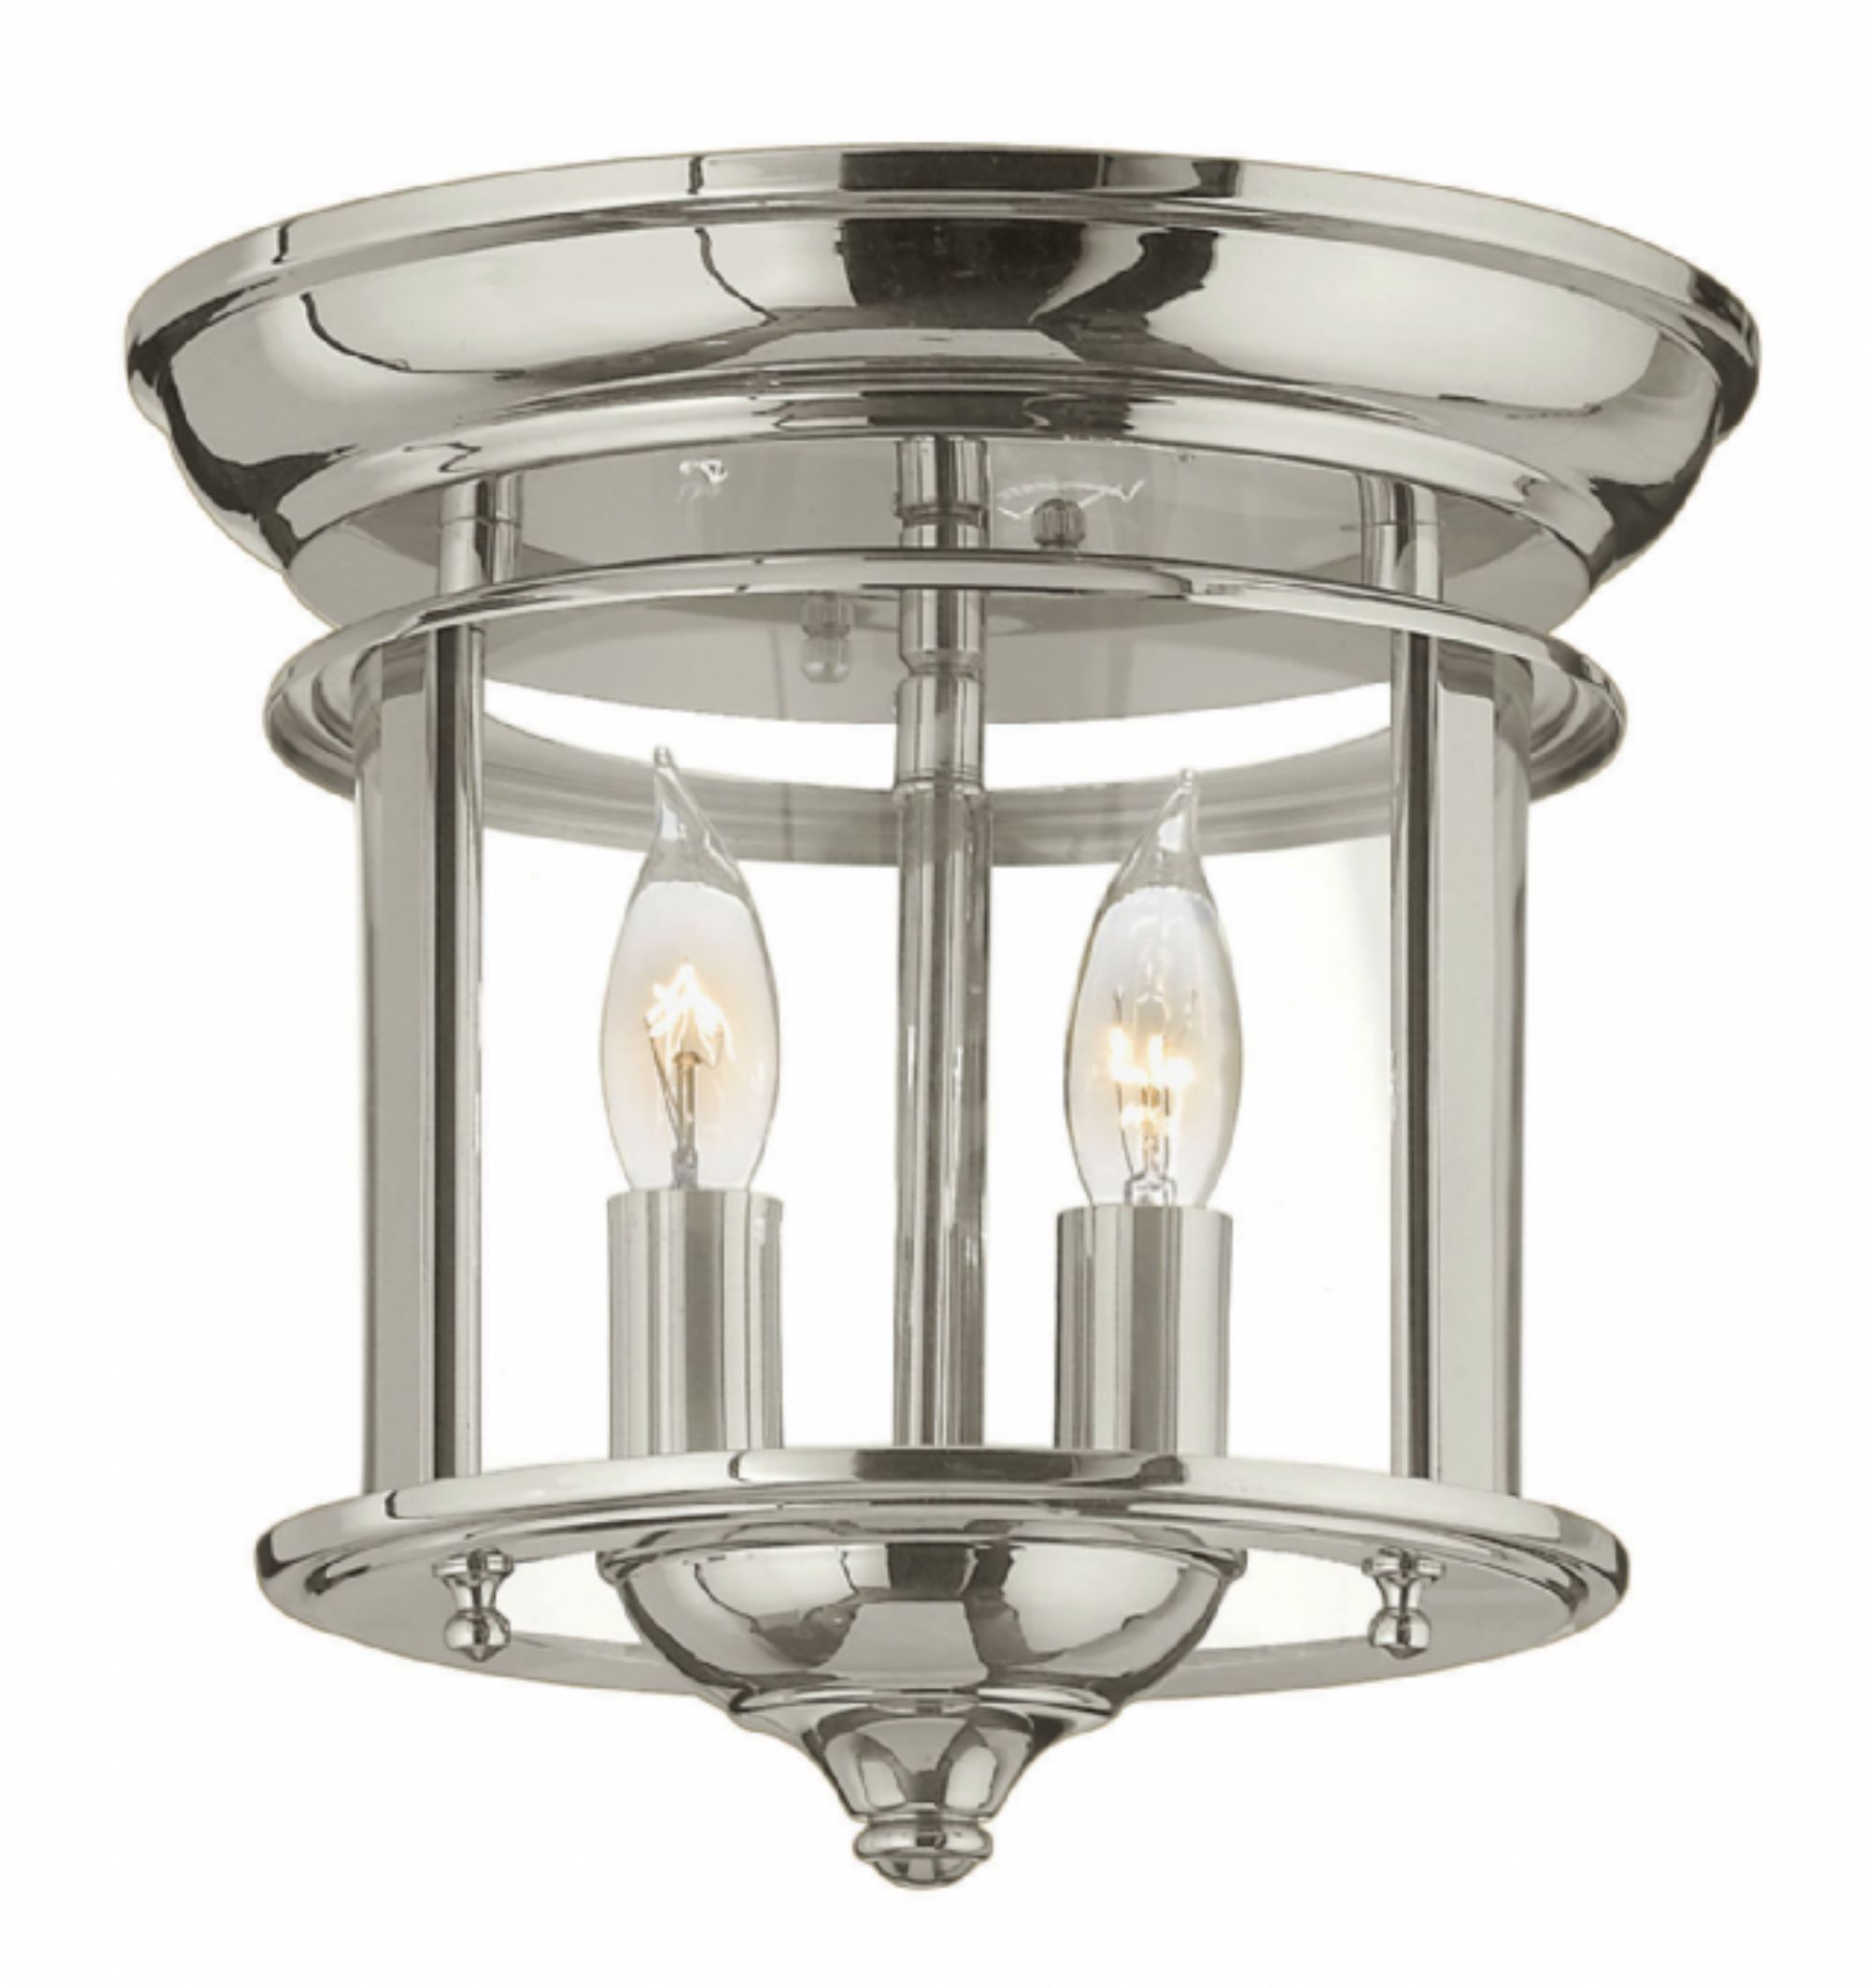 Polished Nickel Gentry > Interior Ceiling Mount With Flush Mount Hinkley Lighting (View 6 of 15)